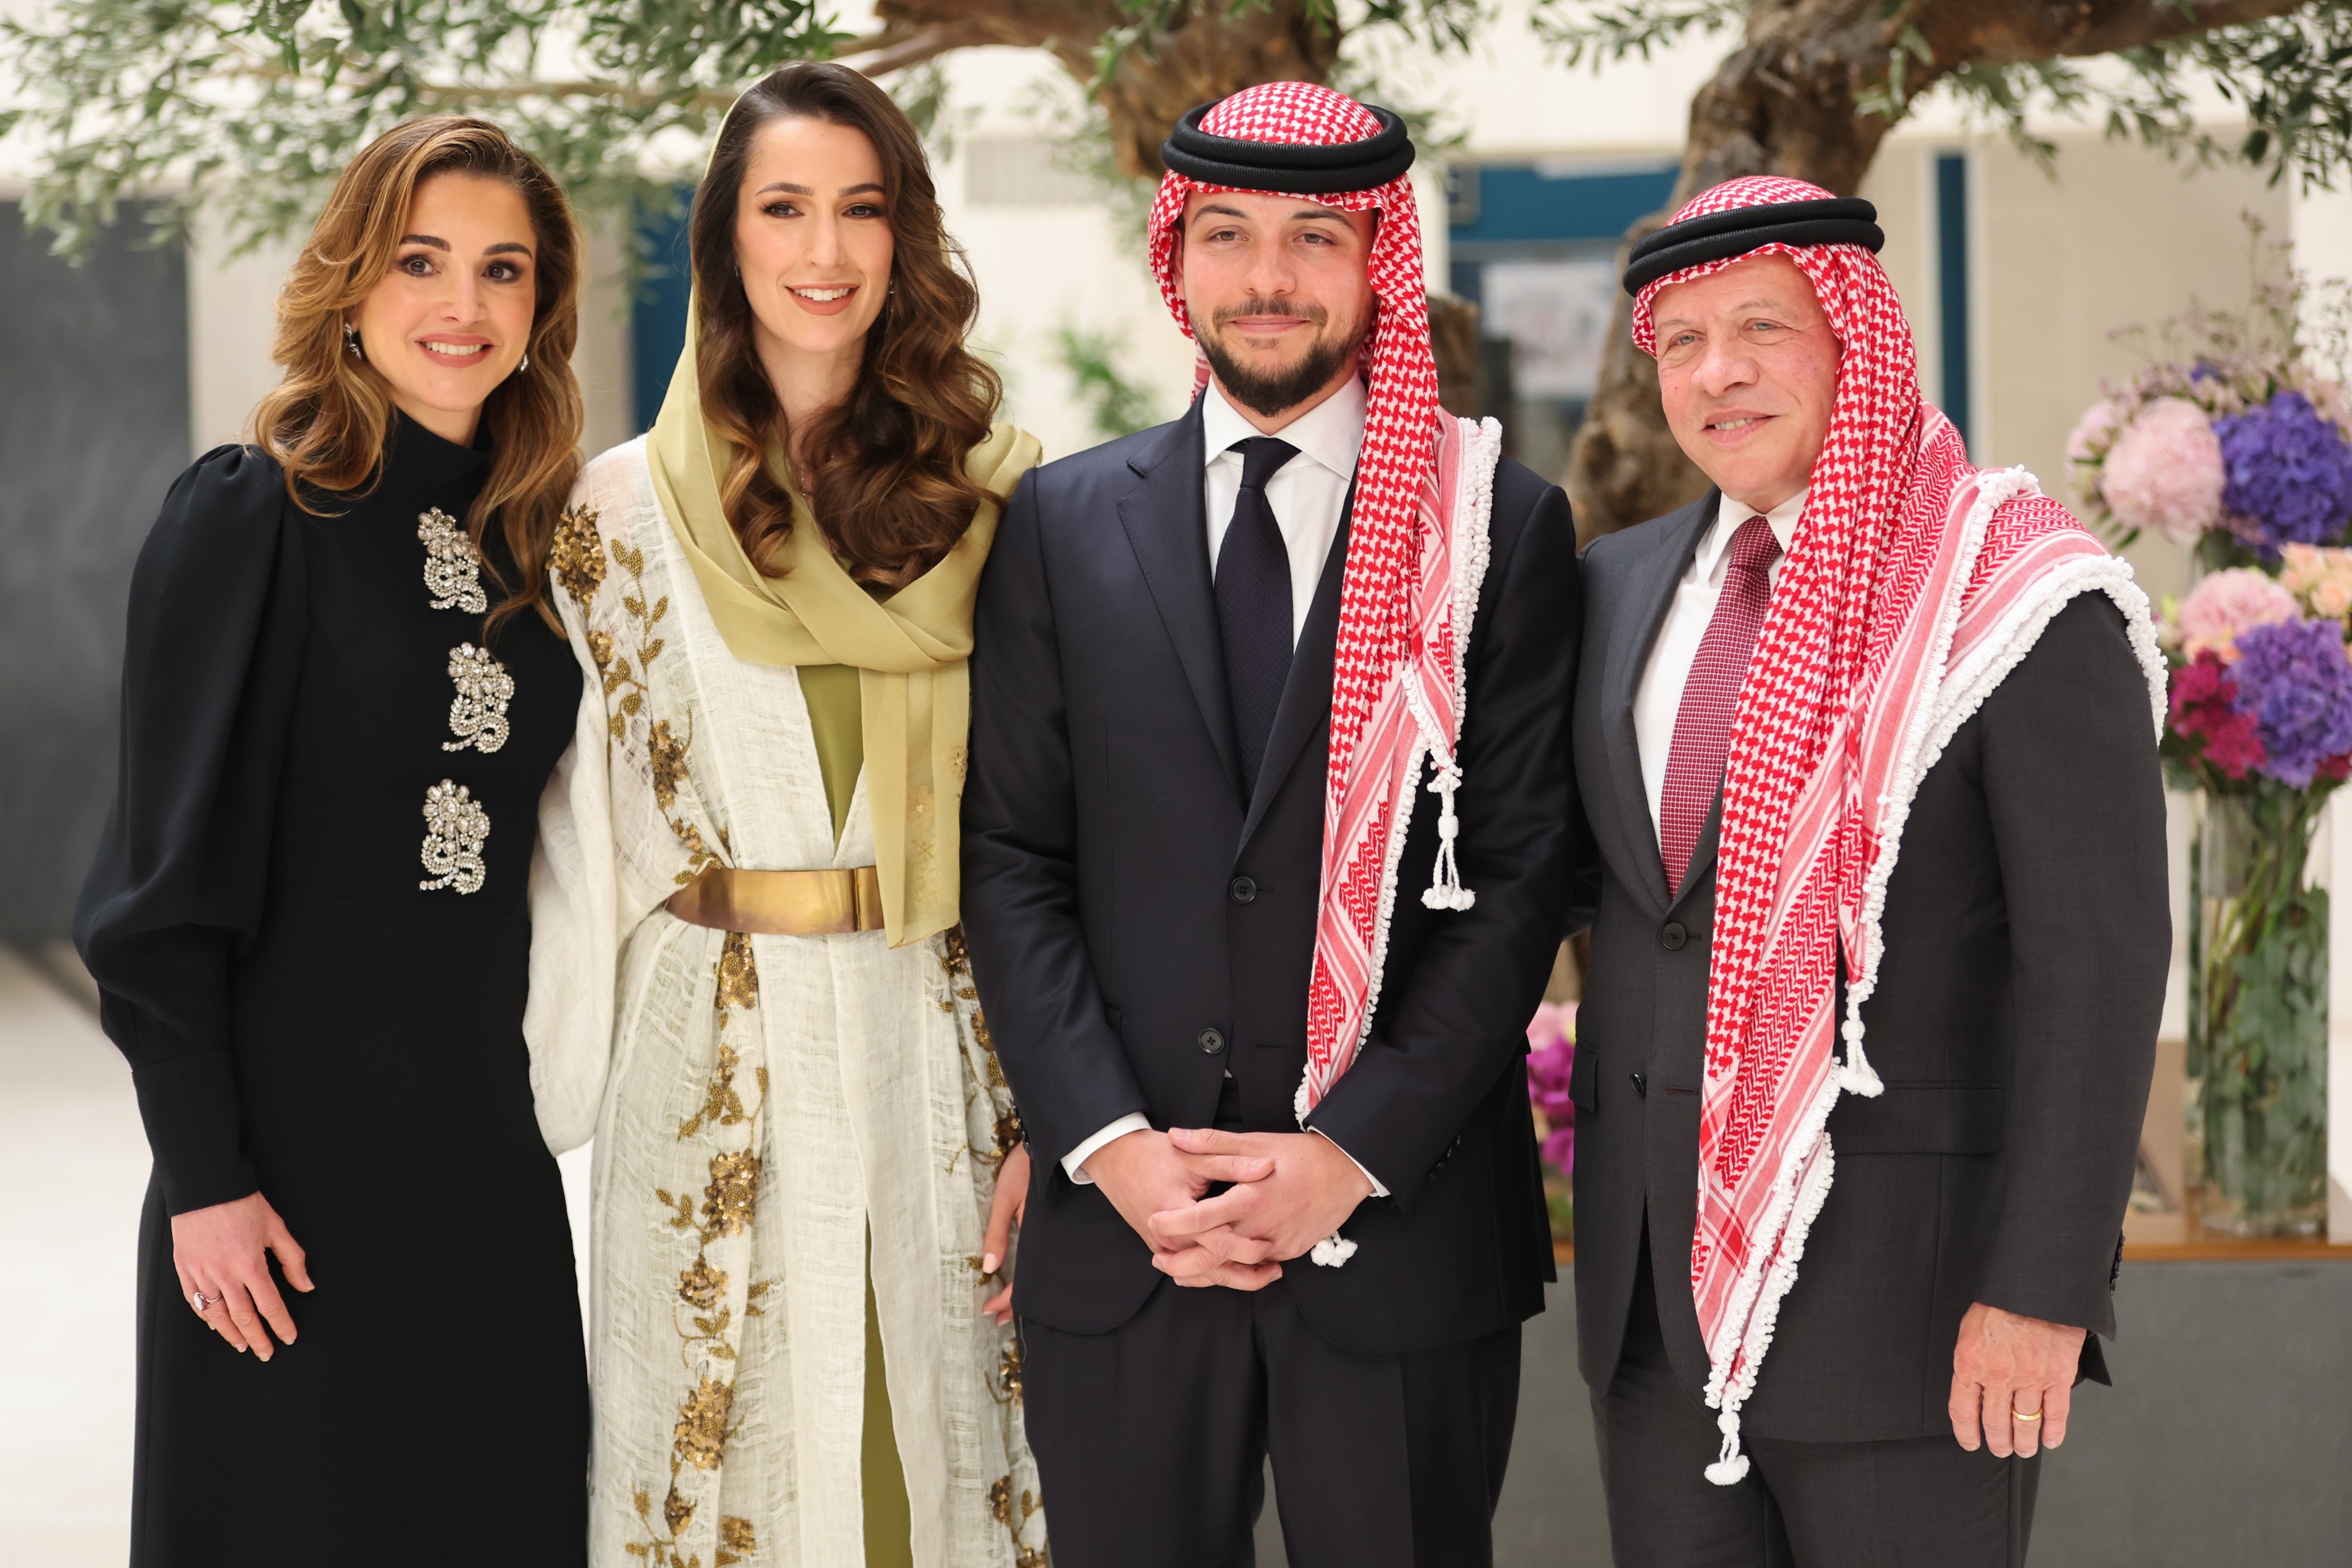 The Crown Prince of Jordan, Hussein, son of King Abdullah the second and Queen Rania is engaged to be married